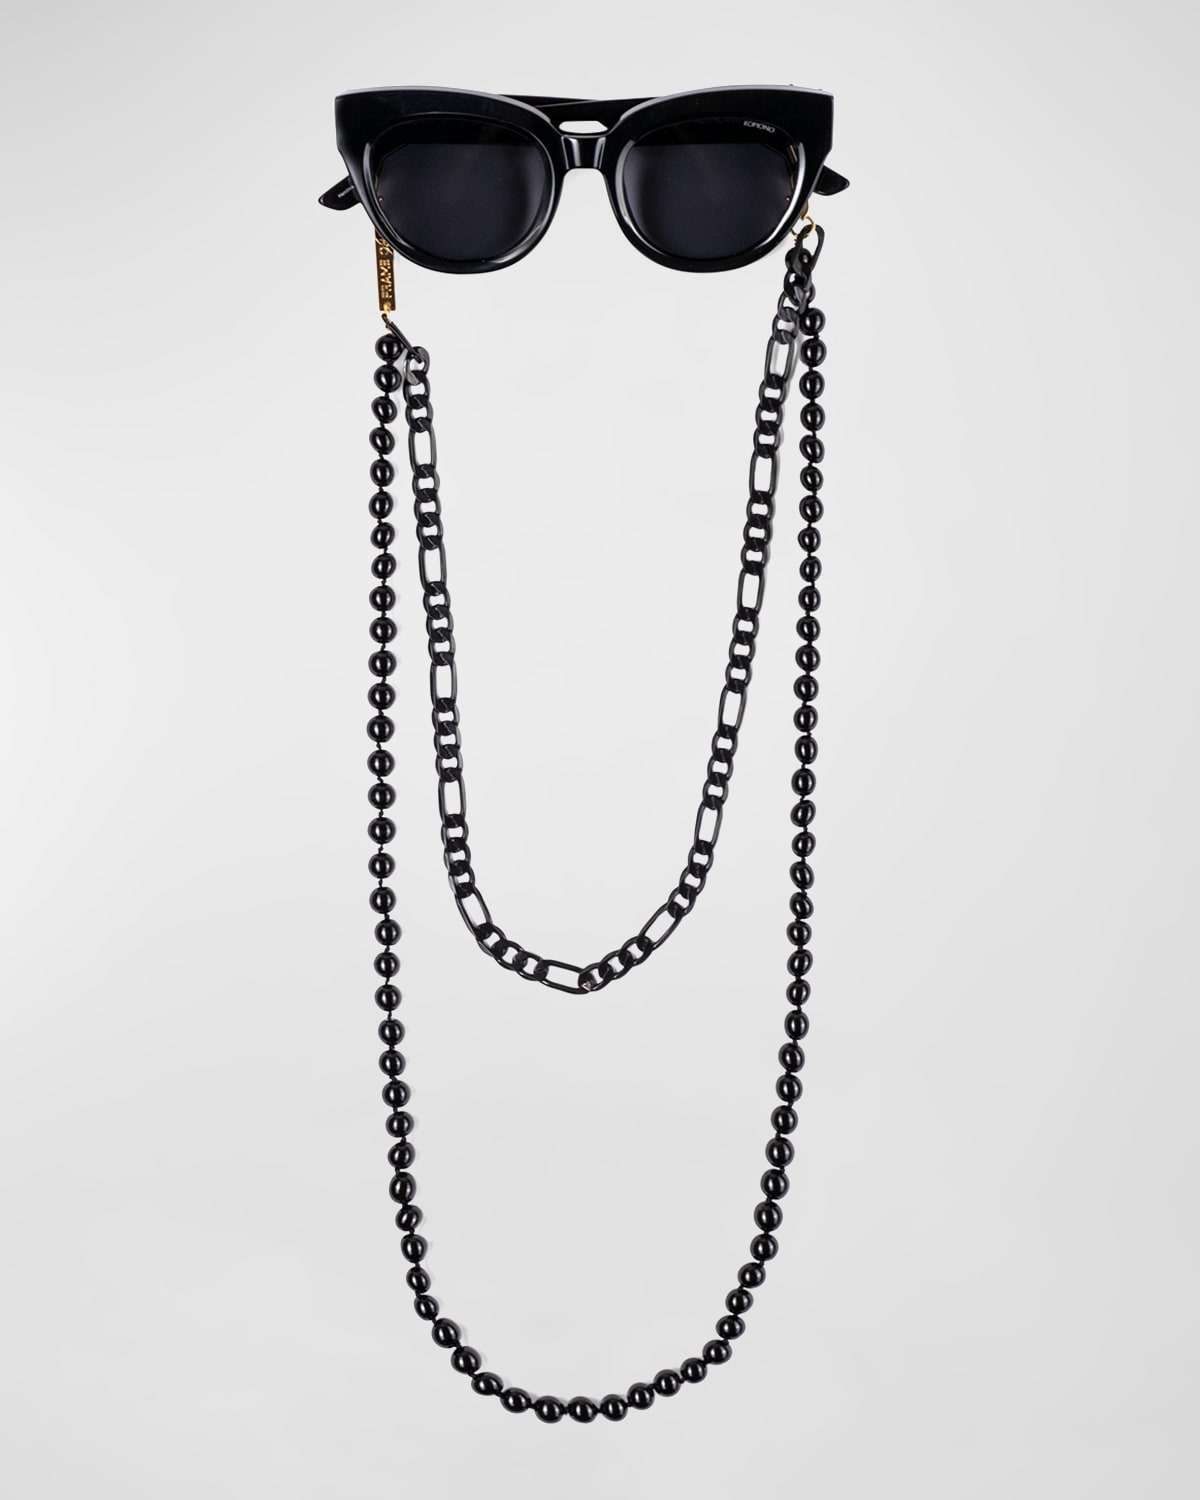 FRAME CHAIN Time for Change Sunglasses Chain Strap